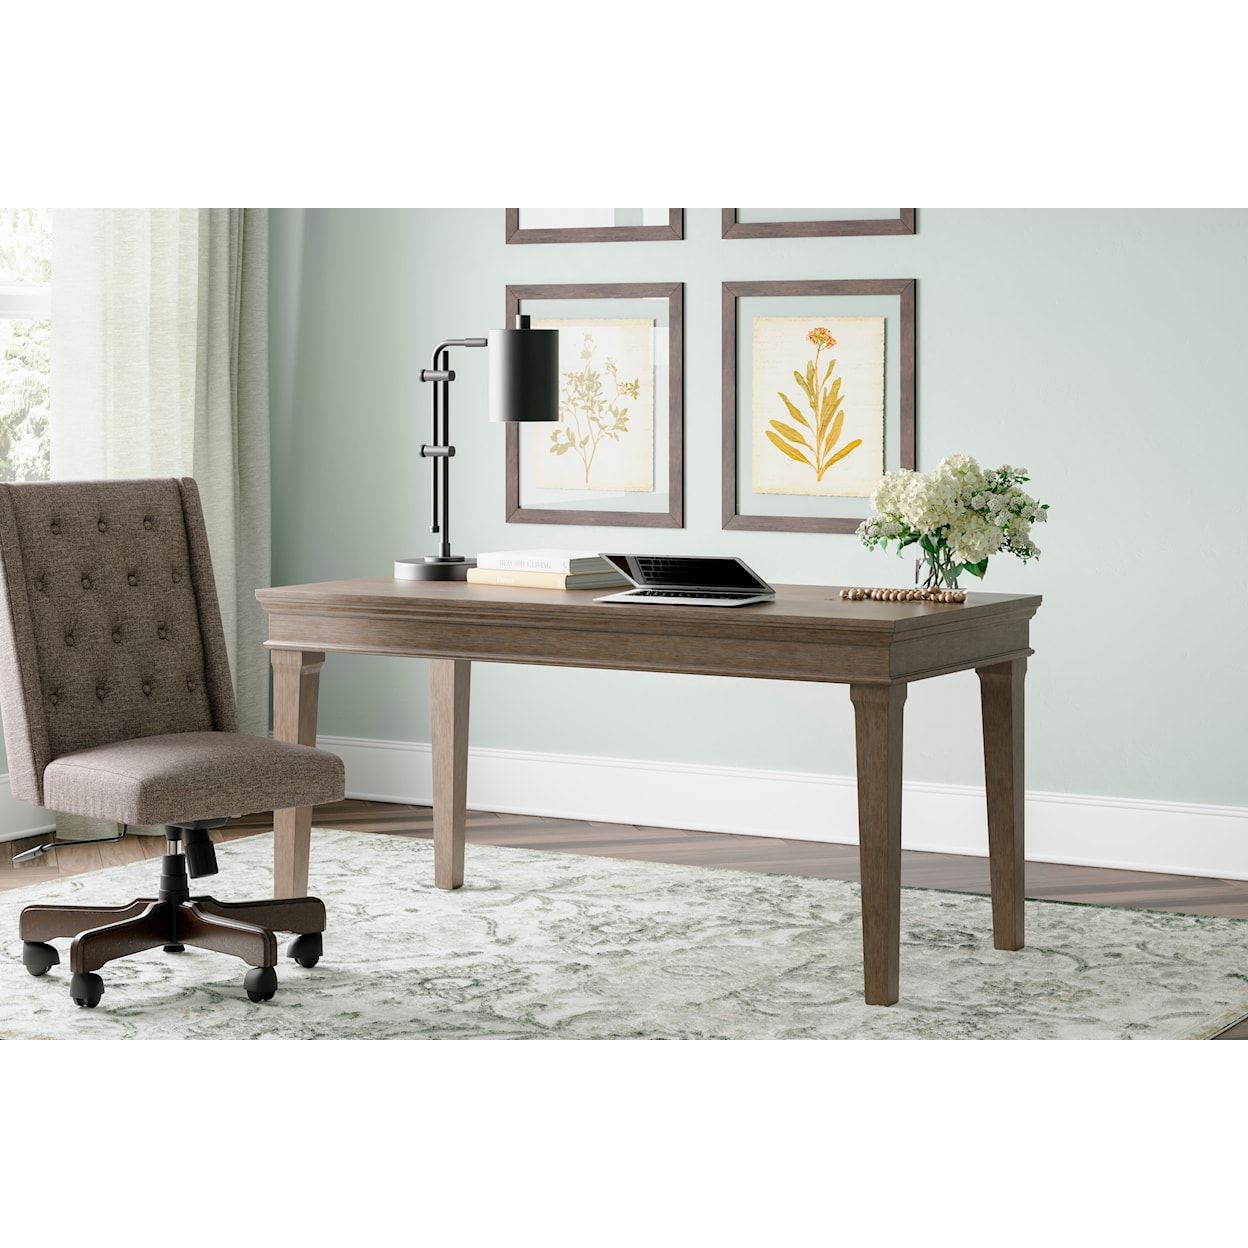 Signature Design by Ashley Janismore 63" Home Office Desk